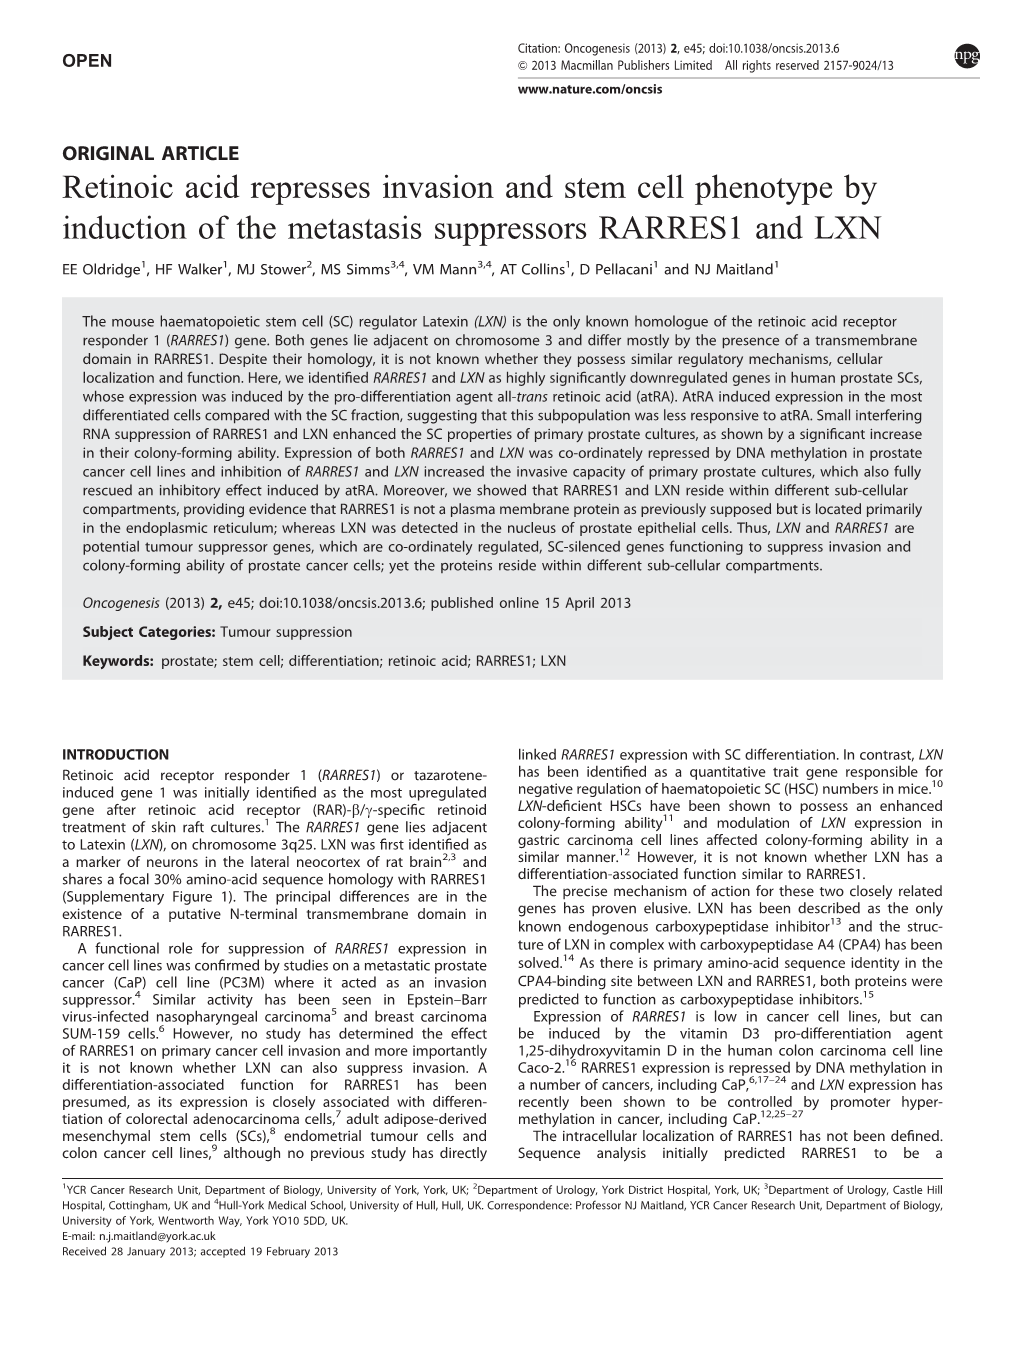 Retinoic Acid Represses Invasion and Stem Cell Phenotype by Induction of the Metastasis Suppressors RARRES1 and LXN